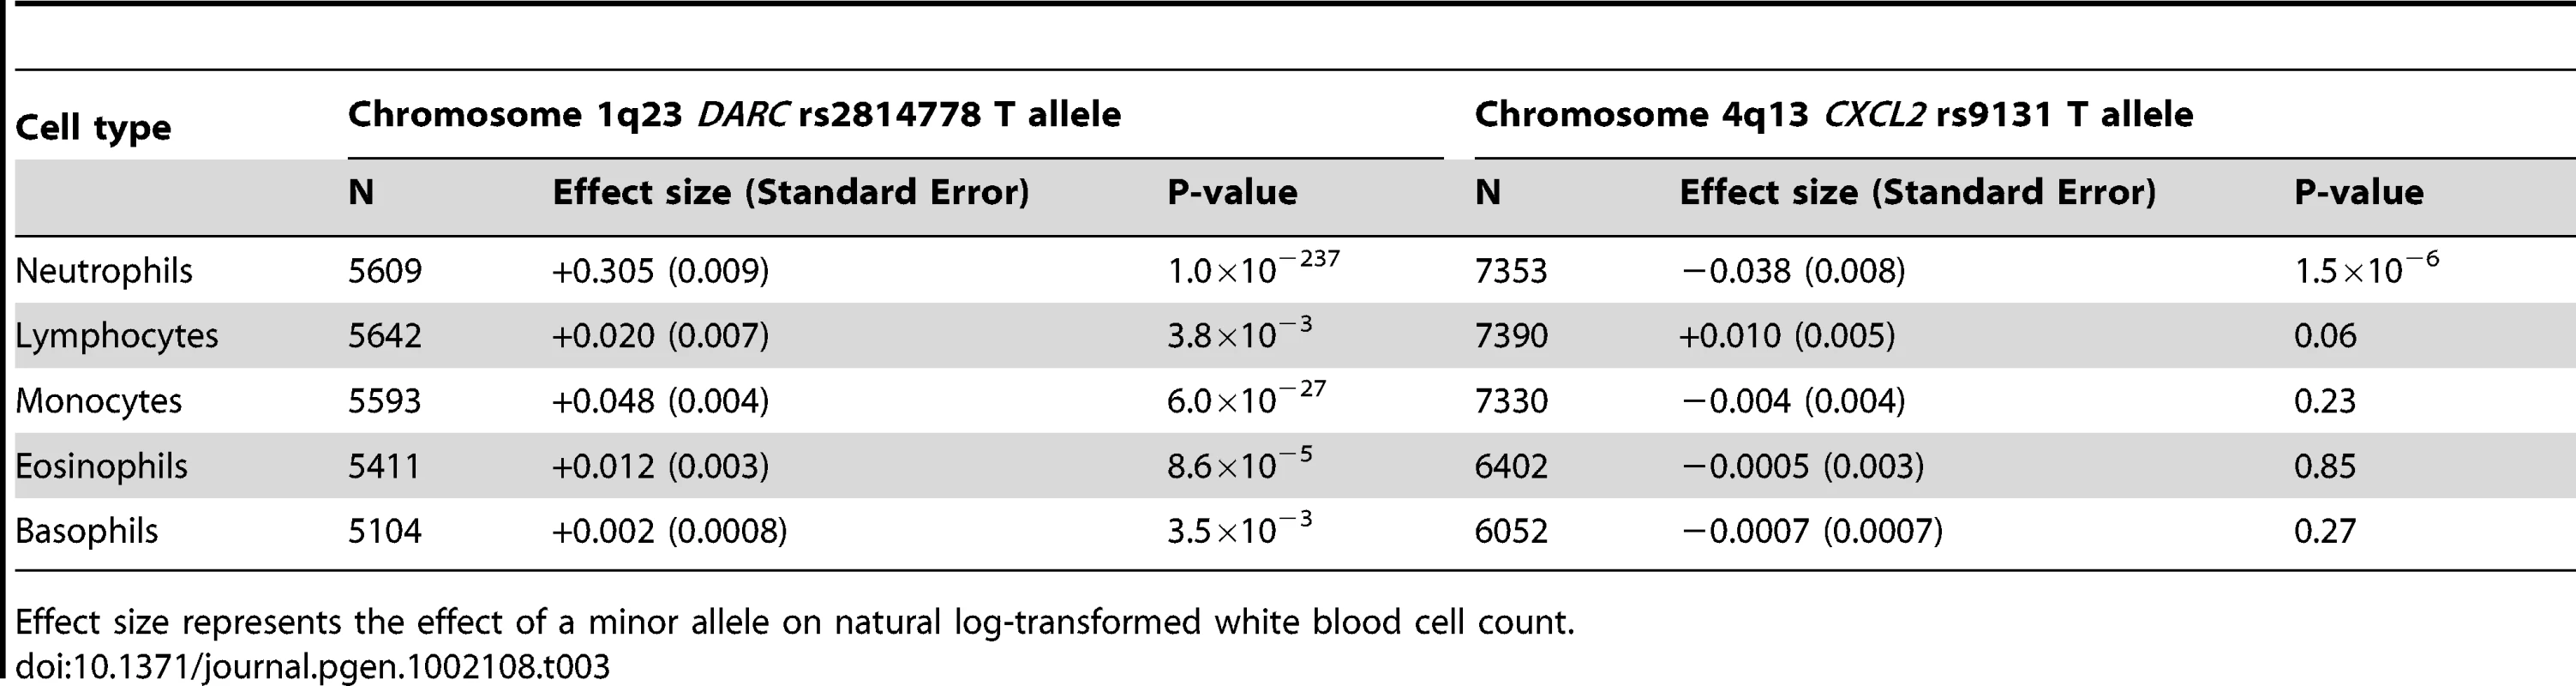 Meta-analysis results of genome-wide significant SNPs for white blood cell count subtypes.